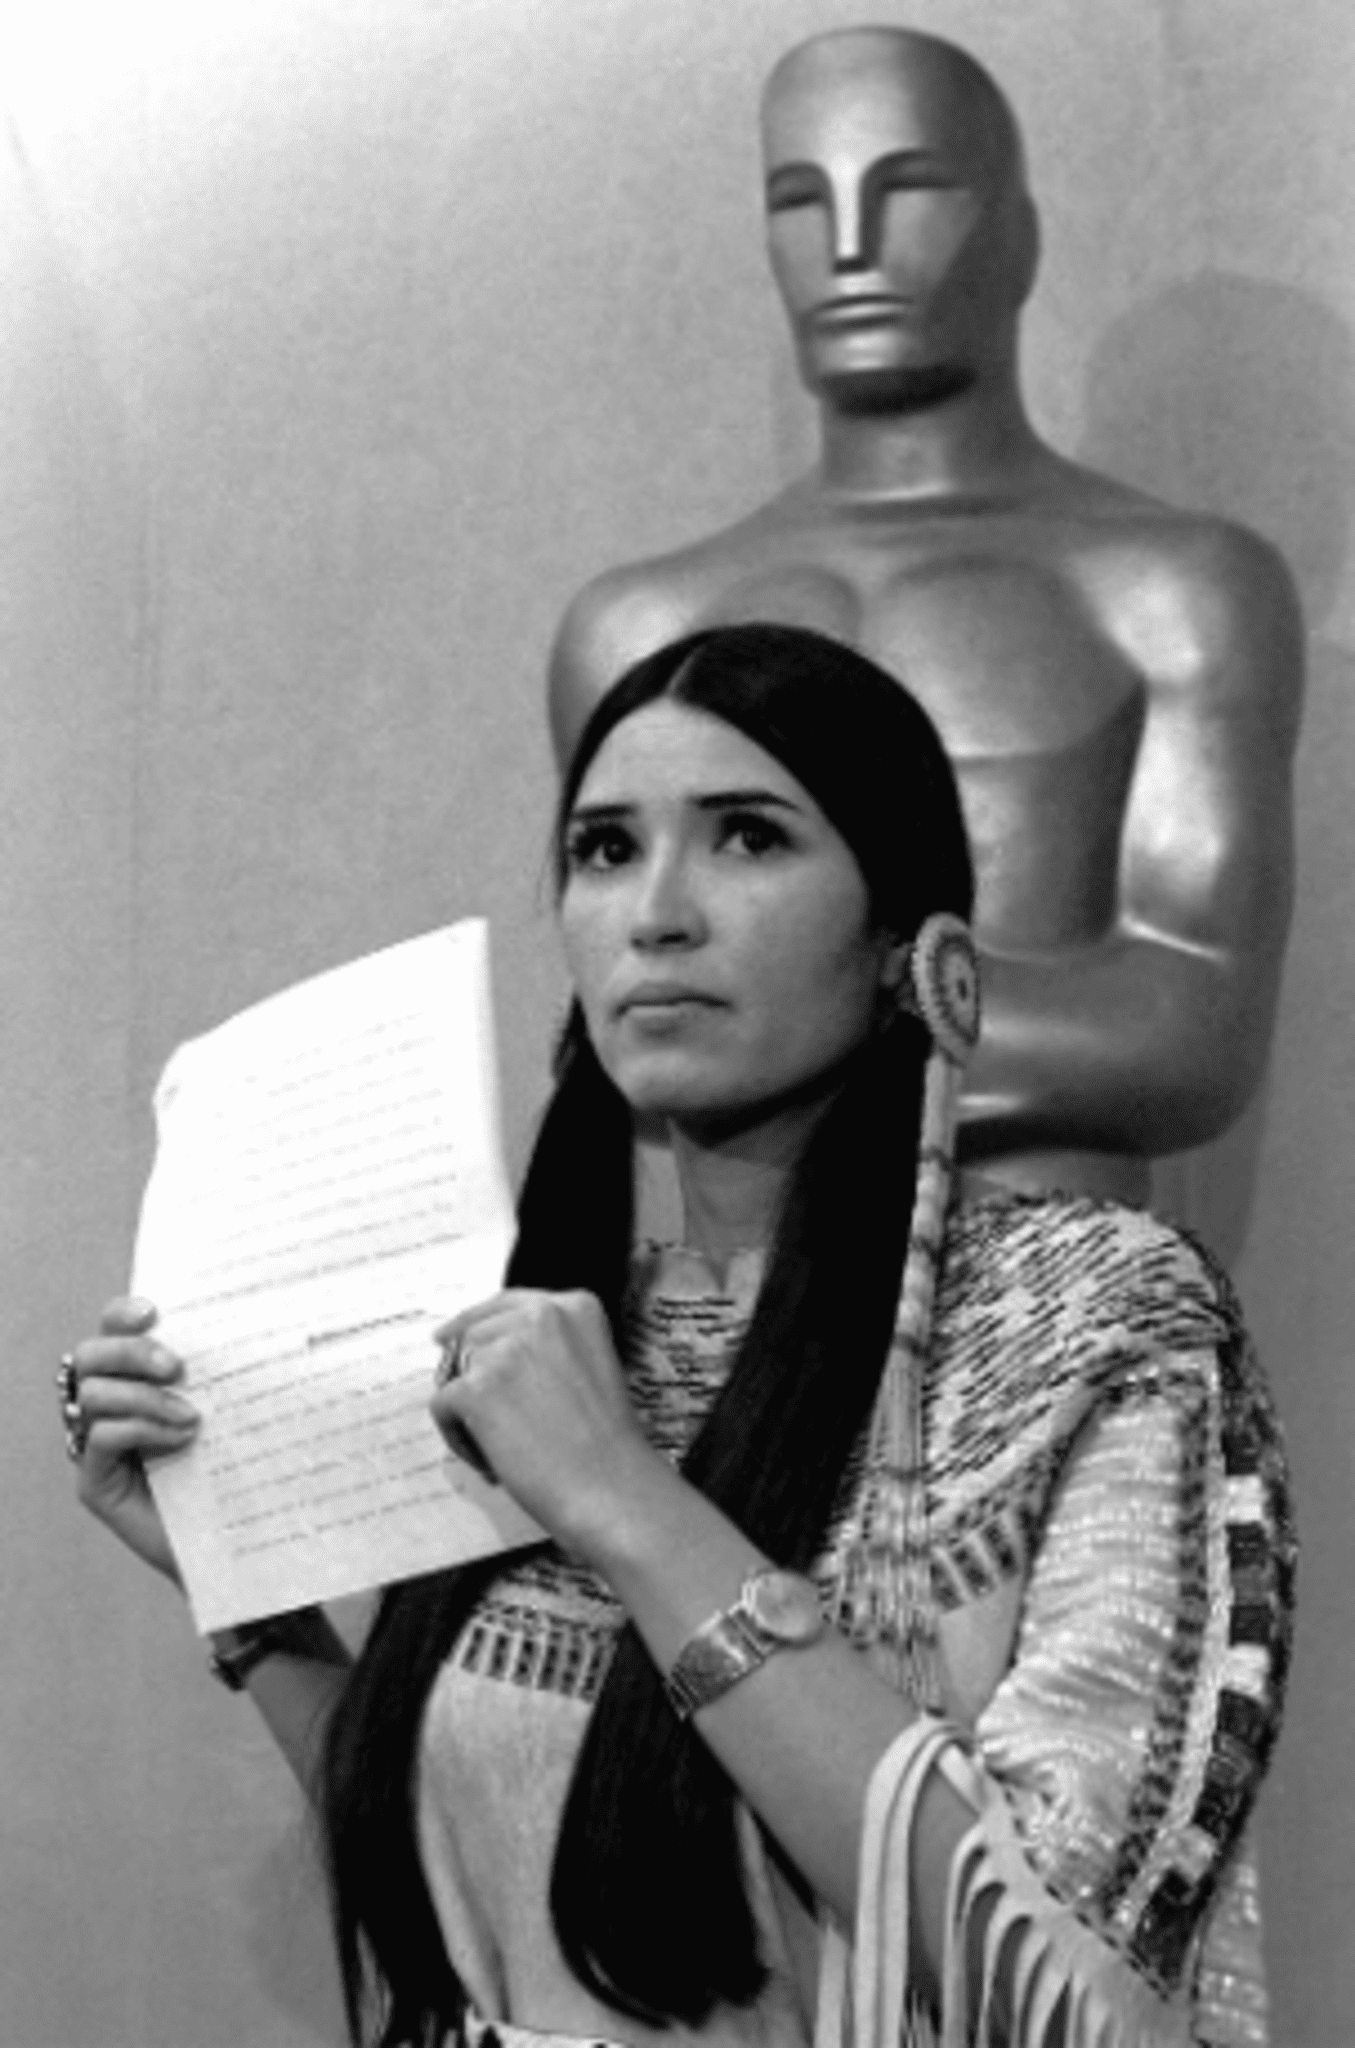 In response to the Academy's apology, Sacheen Littlefeather has decided to accept it.